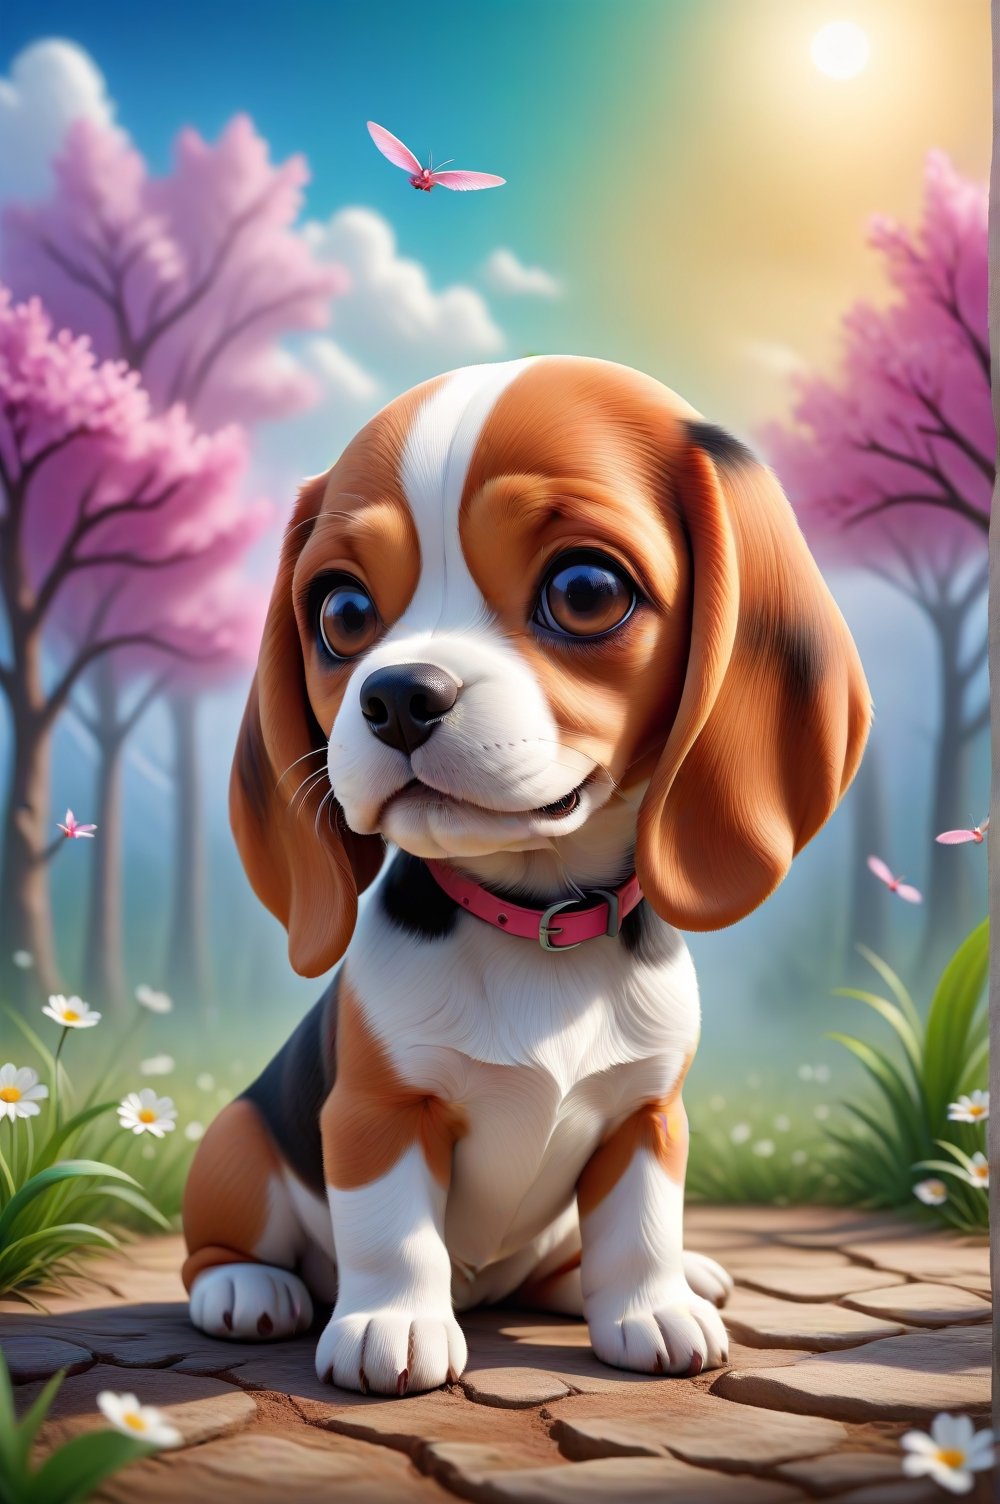 There is a little dog (Beagle race) sitting in a funny pose,  beautiful digital painting,  cute digital art,  cute little dog,  cute detailed digital art,  adorable and cute,  very cute little dog,  a cute little dog,  beautiful 3D rendering,  cute little dog,  cute and adorable,  visual image of a cute and adorable puppy. Spring weather in the background.,,chibi,,,,<lora:659095807385103906:1.0>